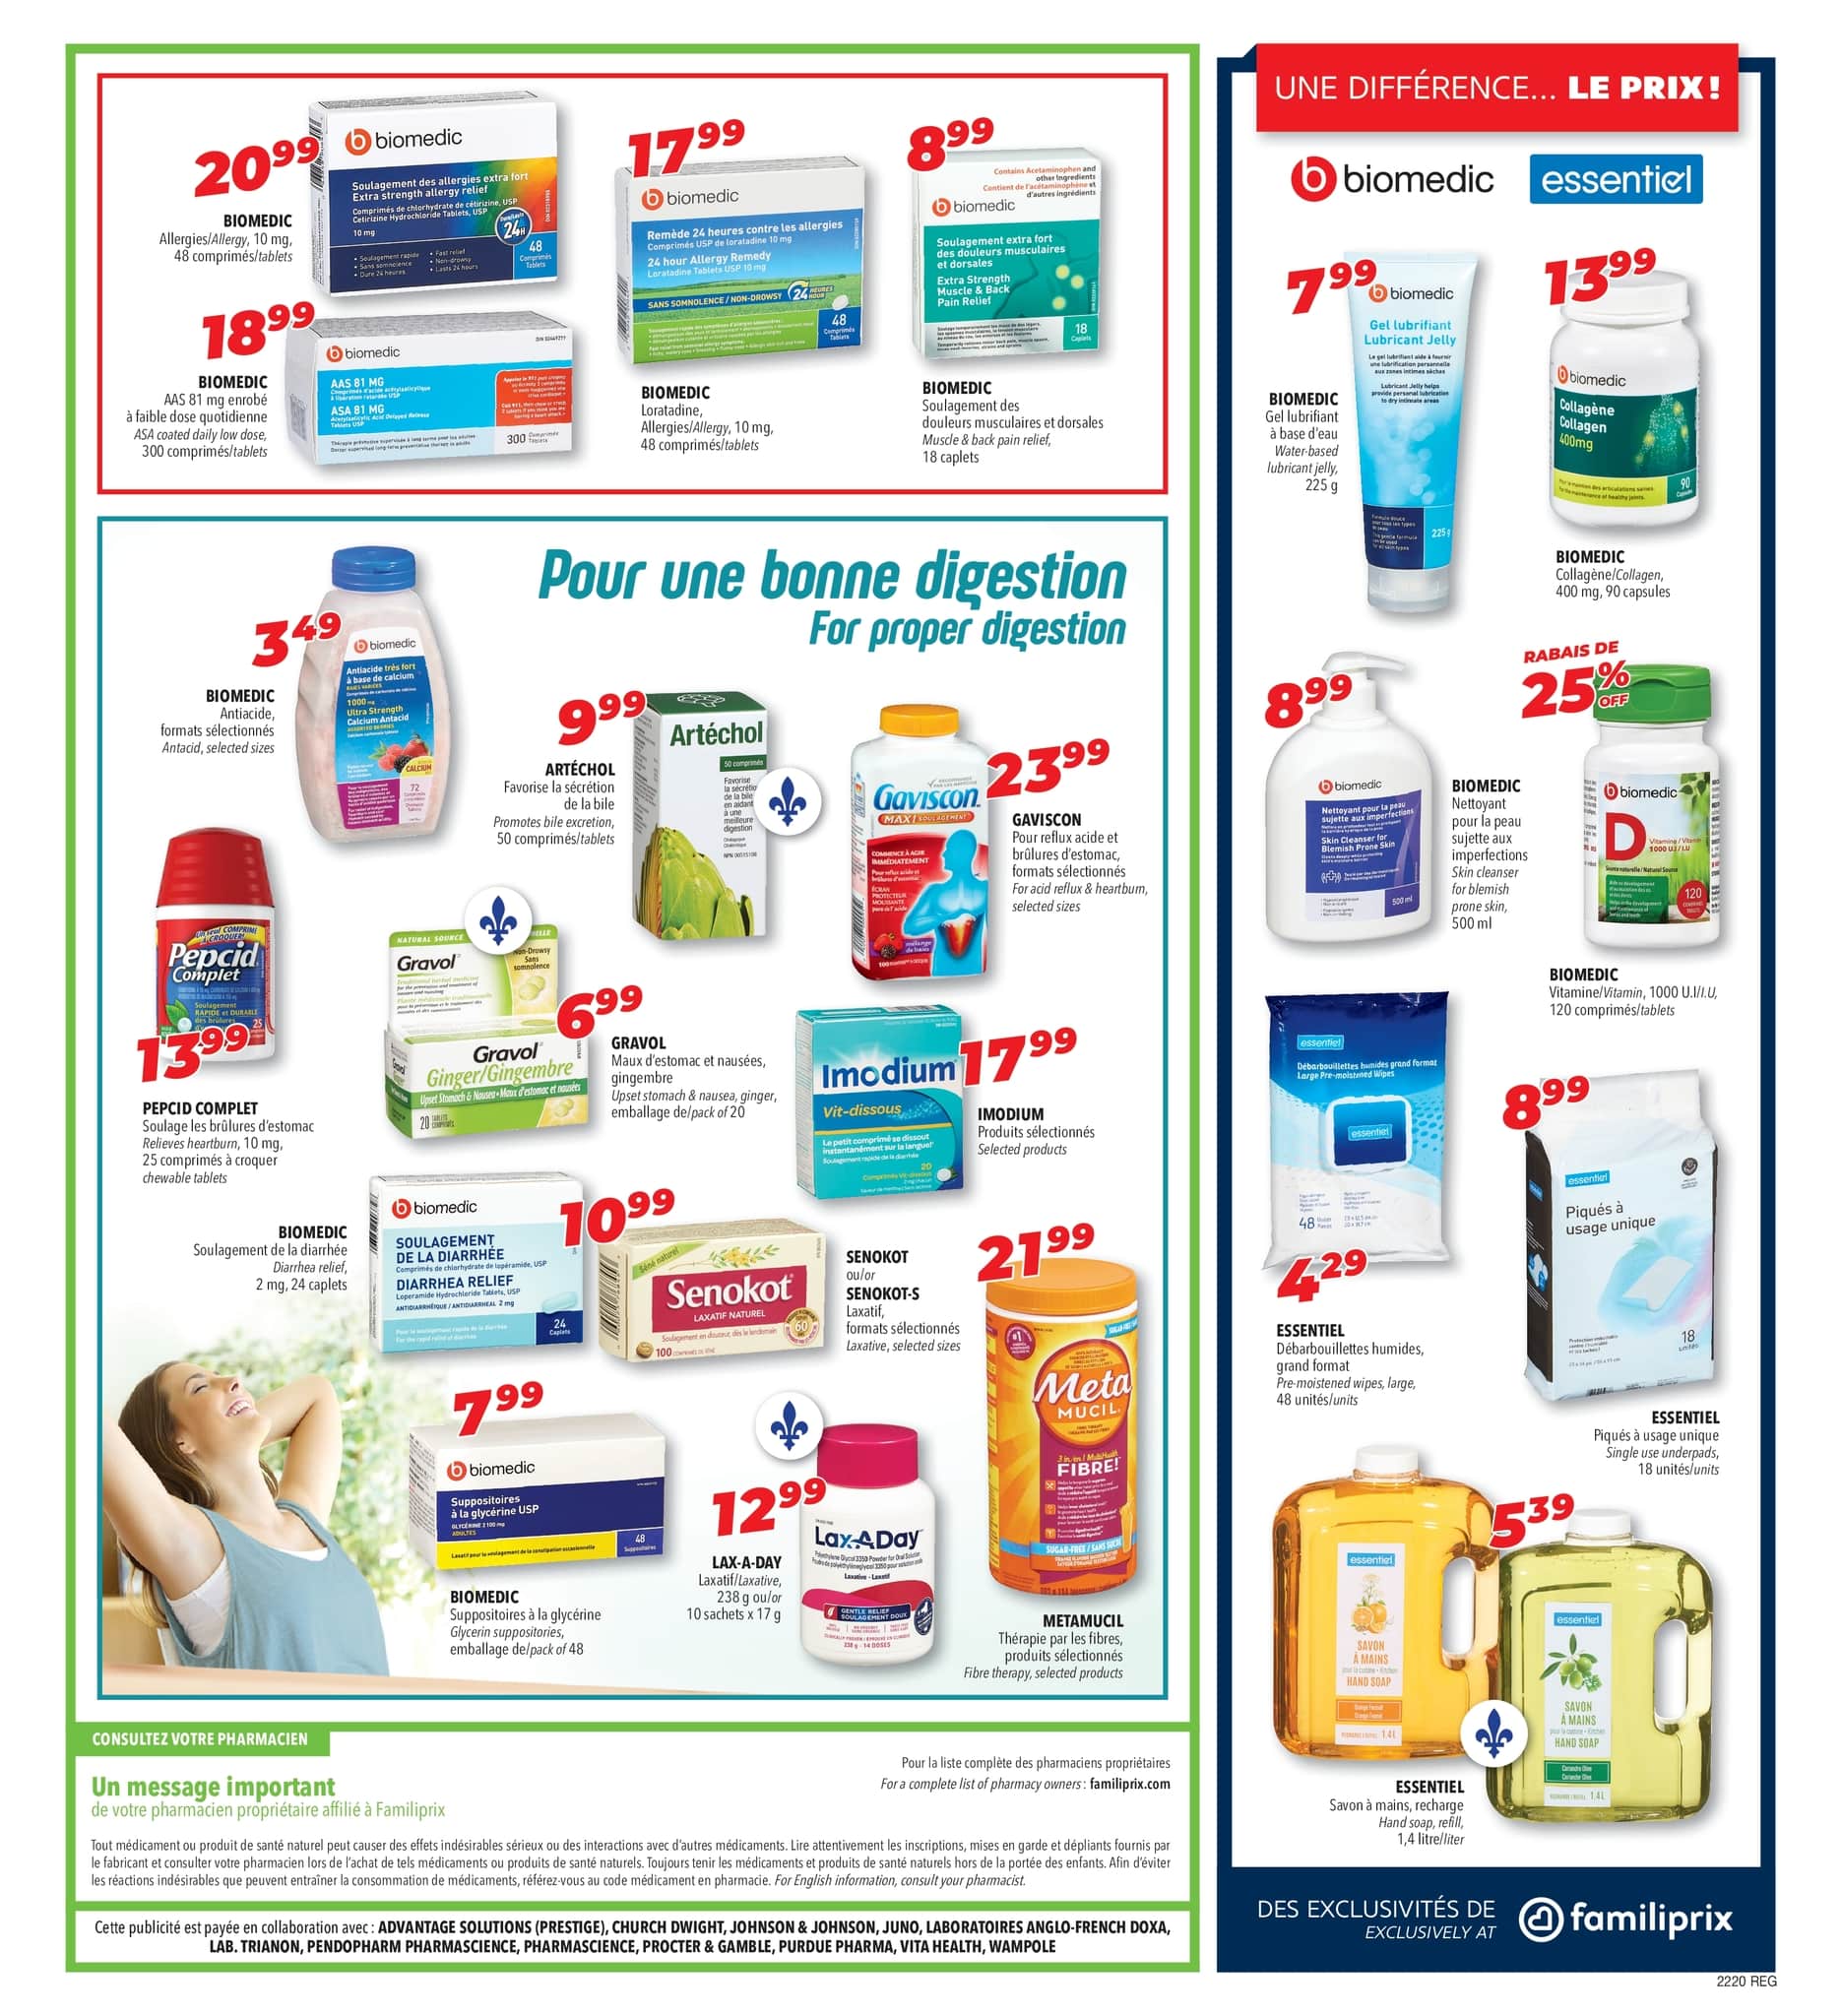 Familiprix - Weekly Flyer Specials - Page 7